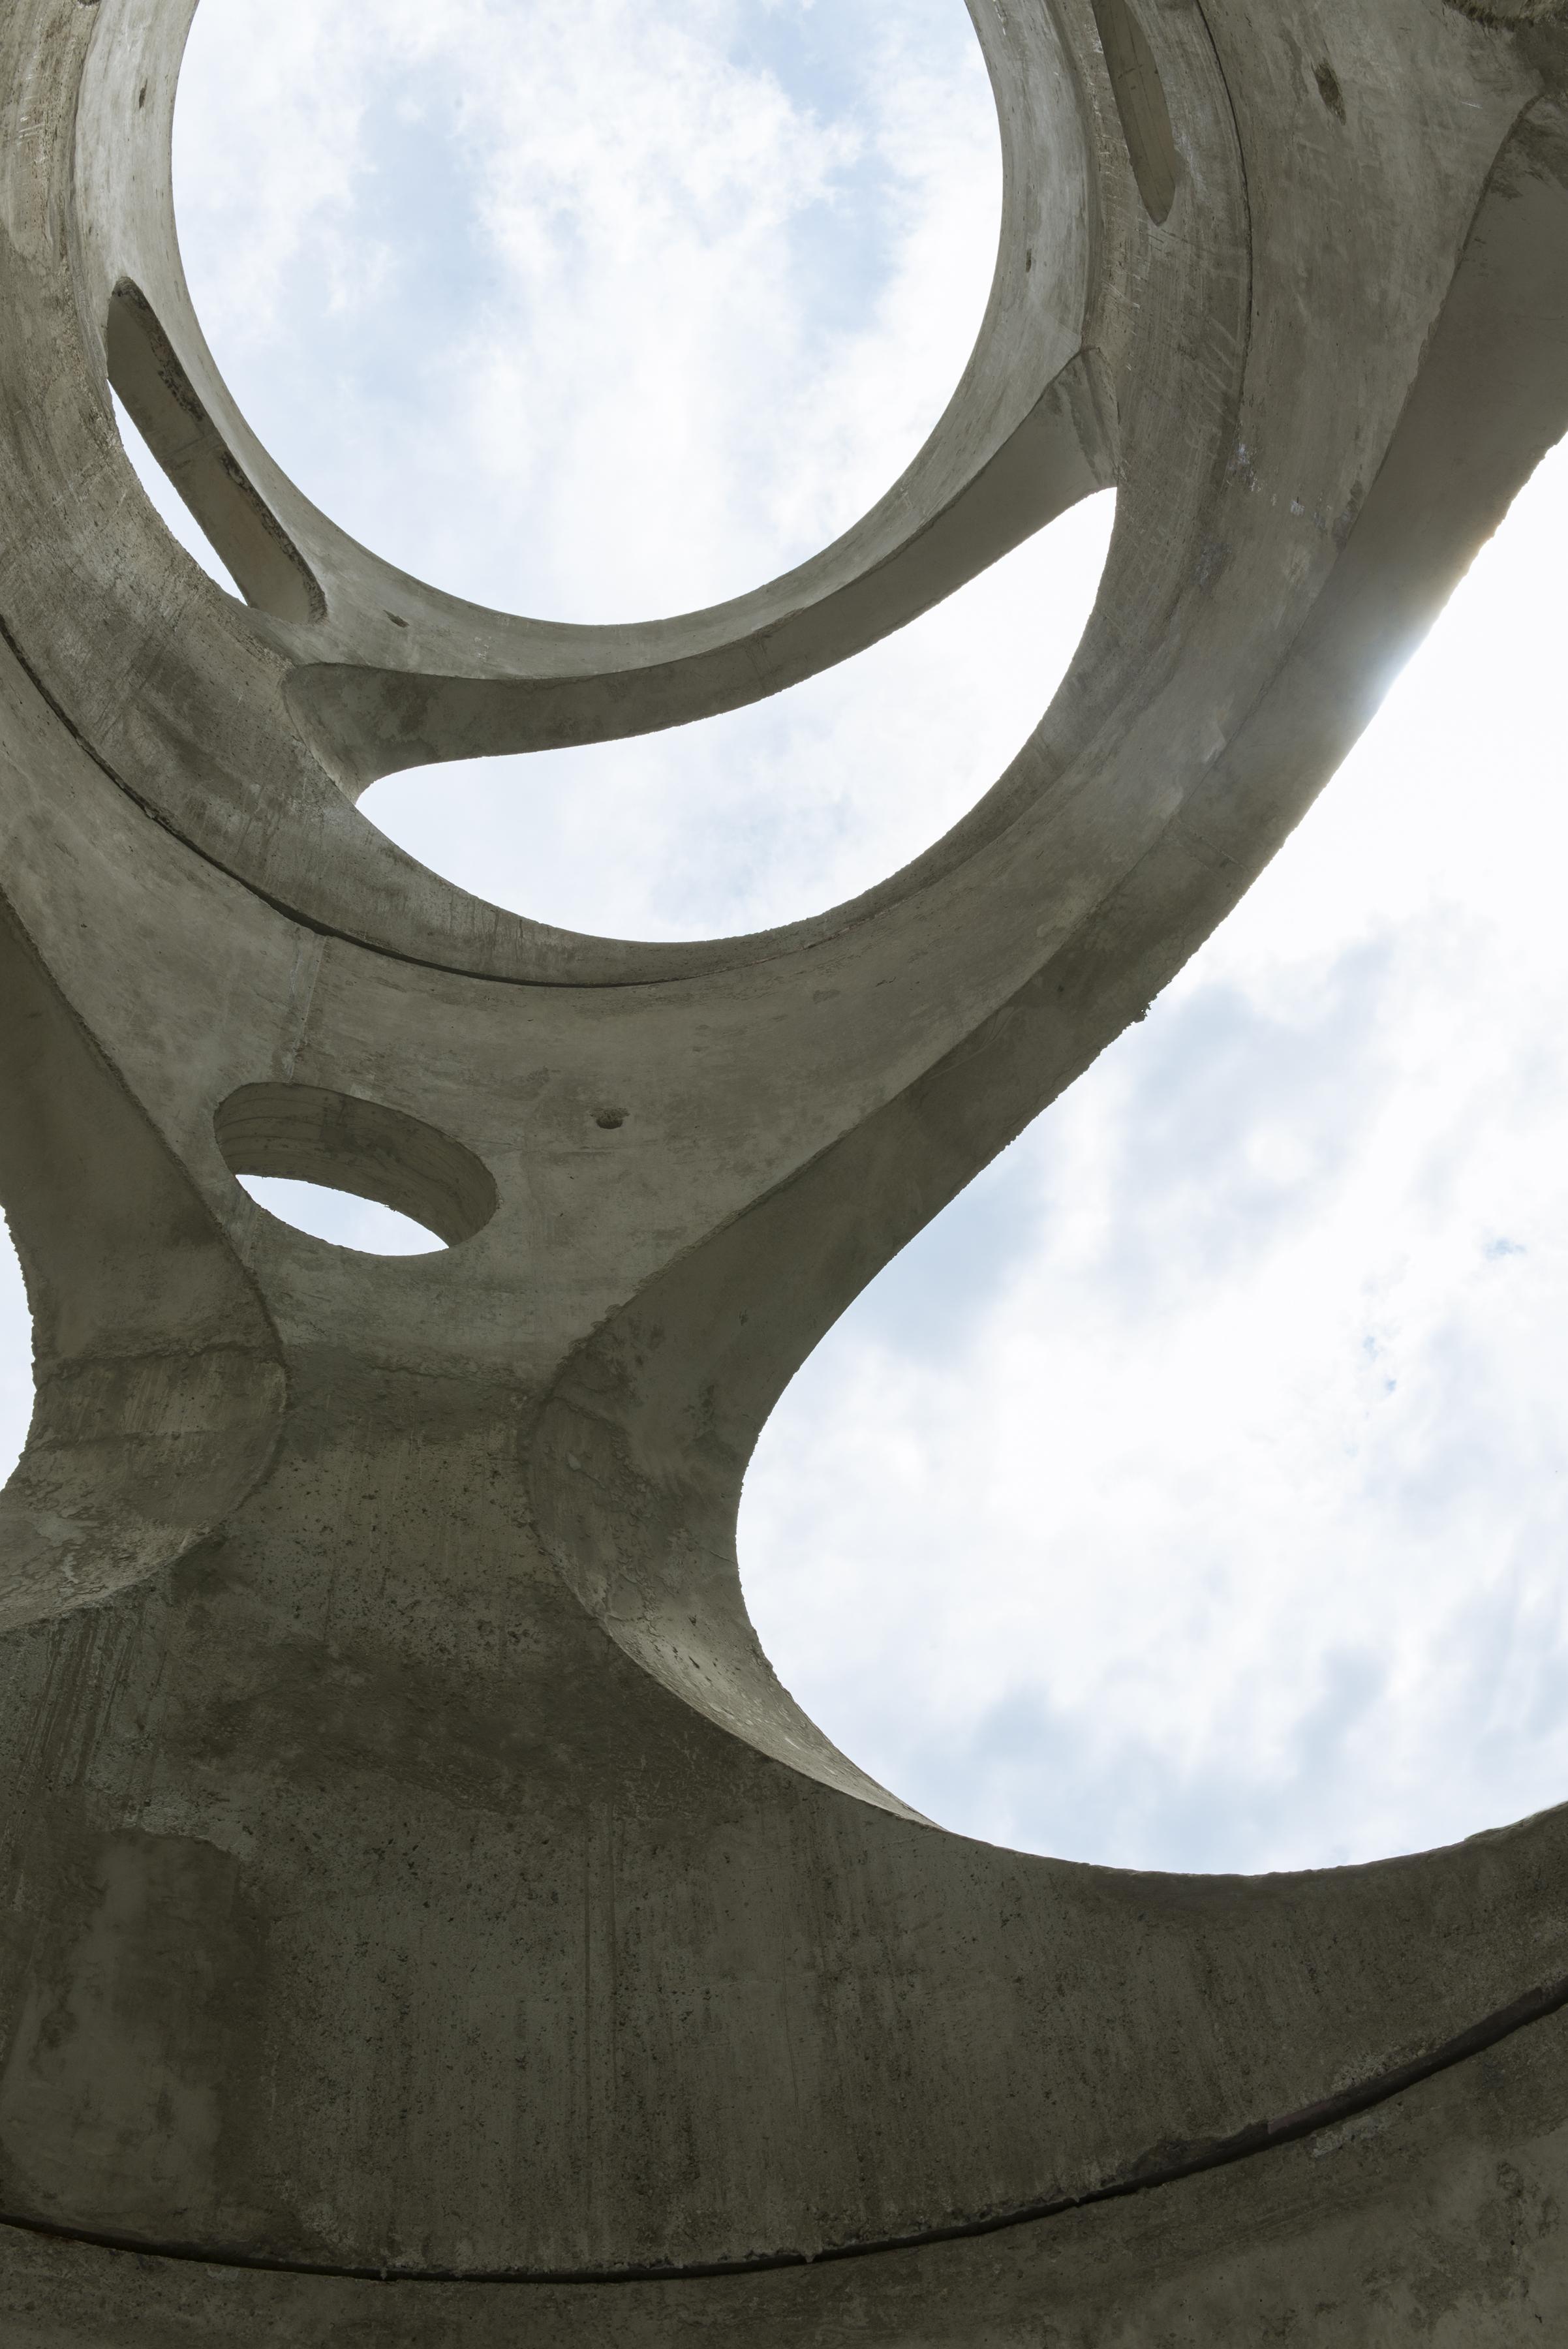 View of a bright cloudy sky through a cylindrical concrete sculpture with circle cutouts